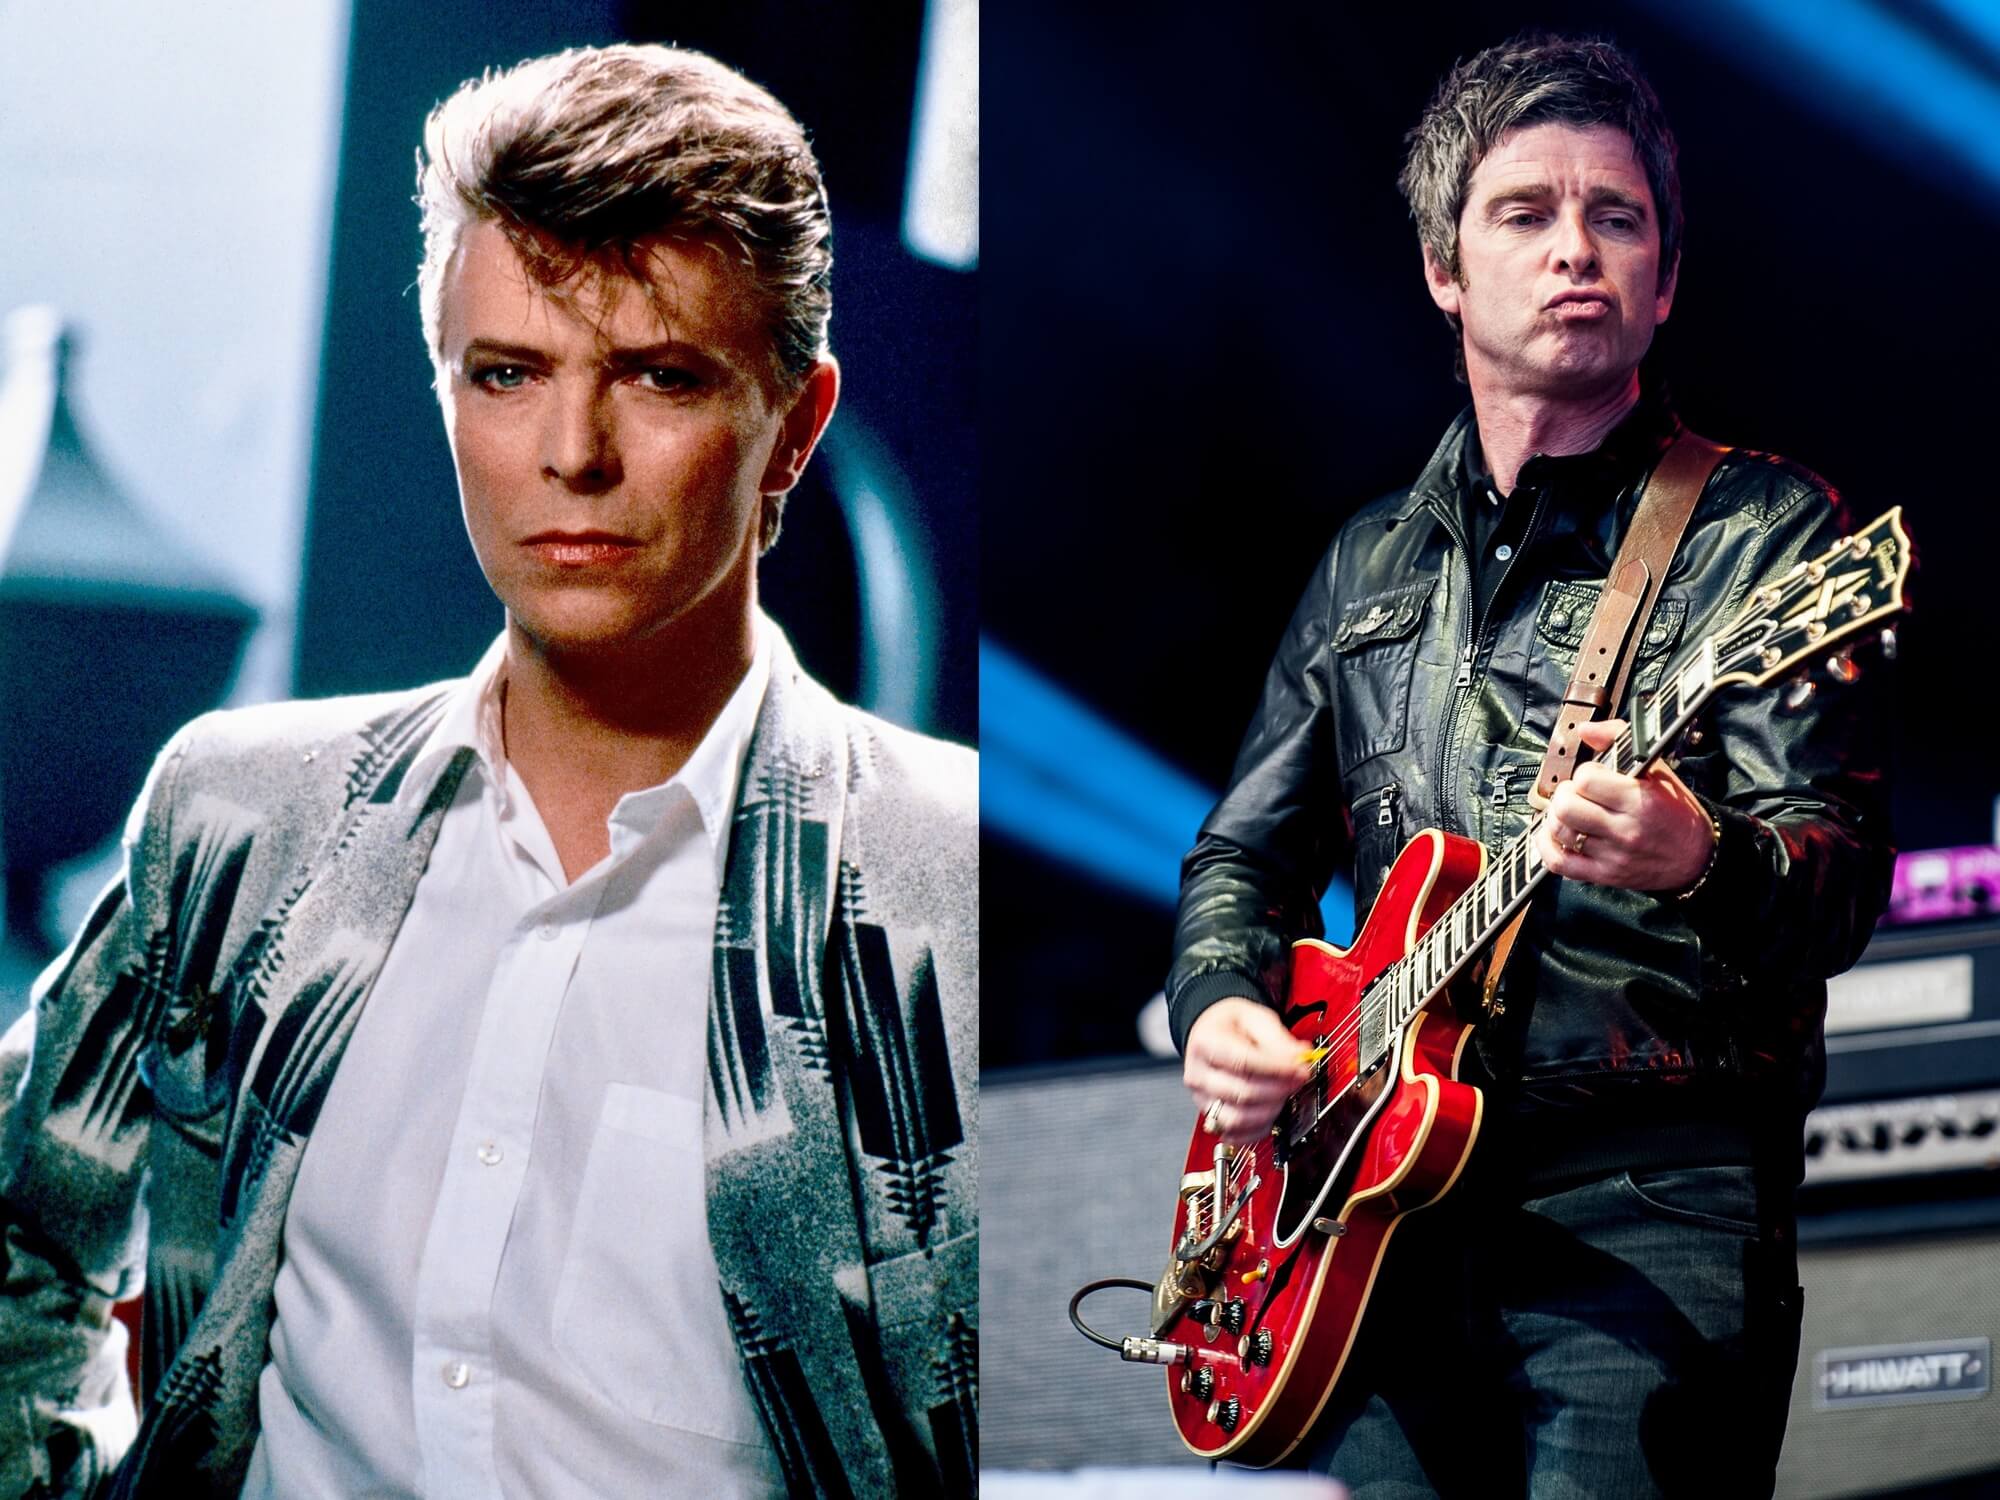 David Bowie and Noel Gallagher